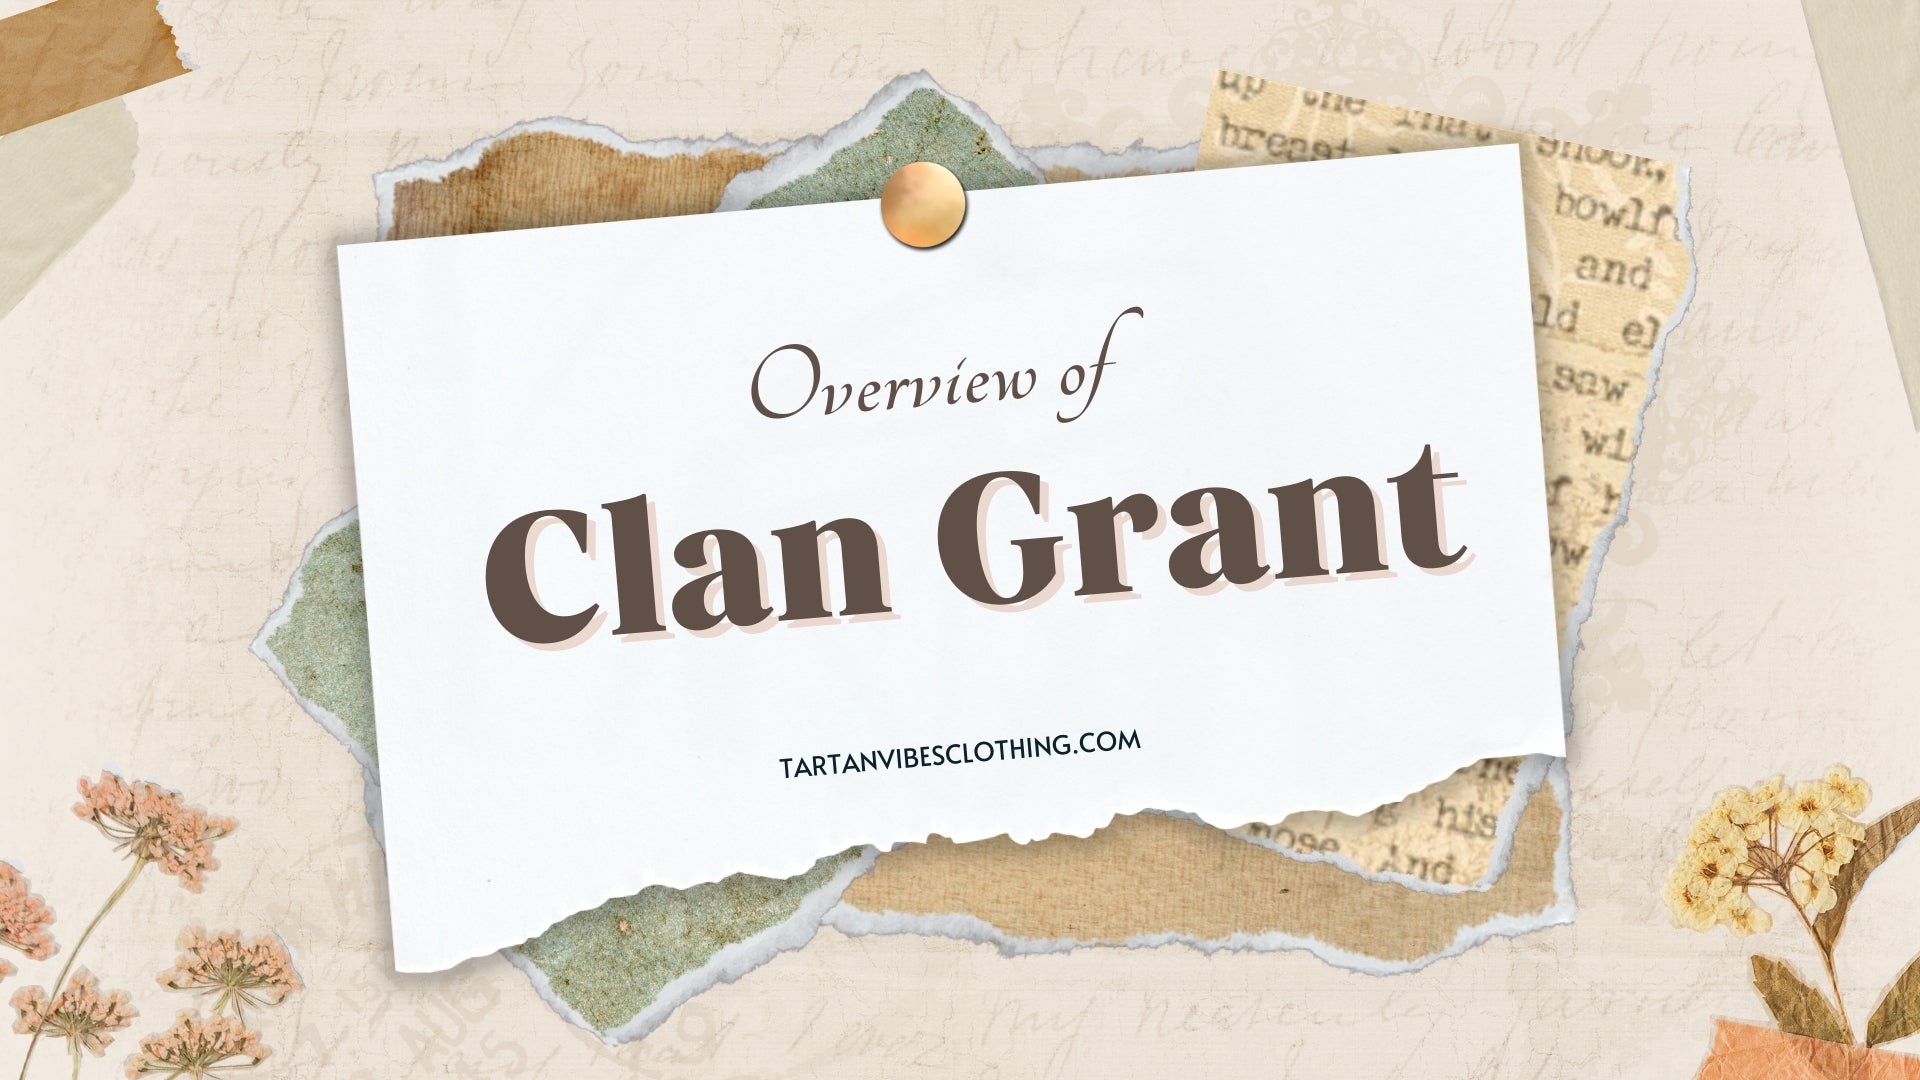 A Brief Overview of Clan Grant